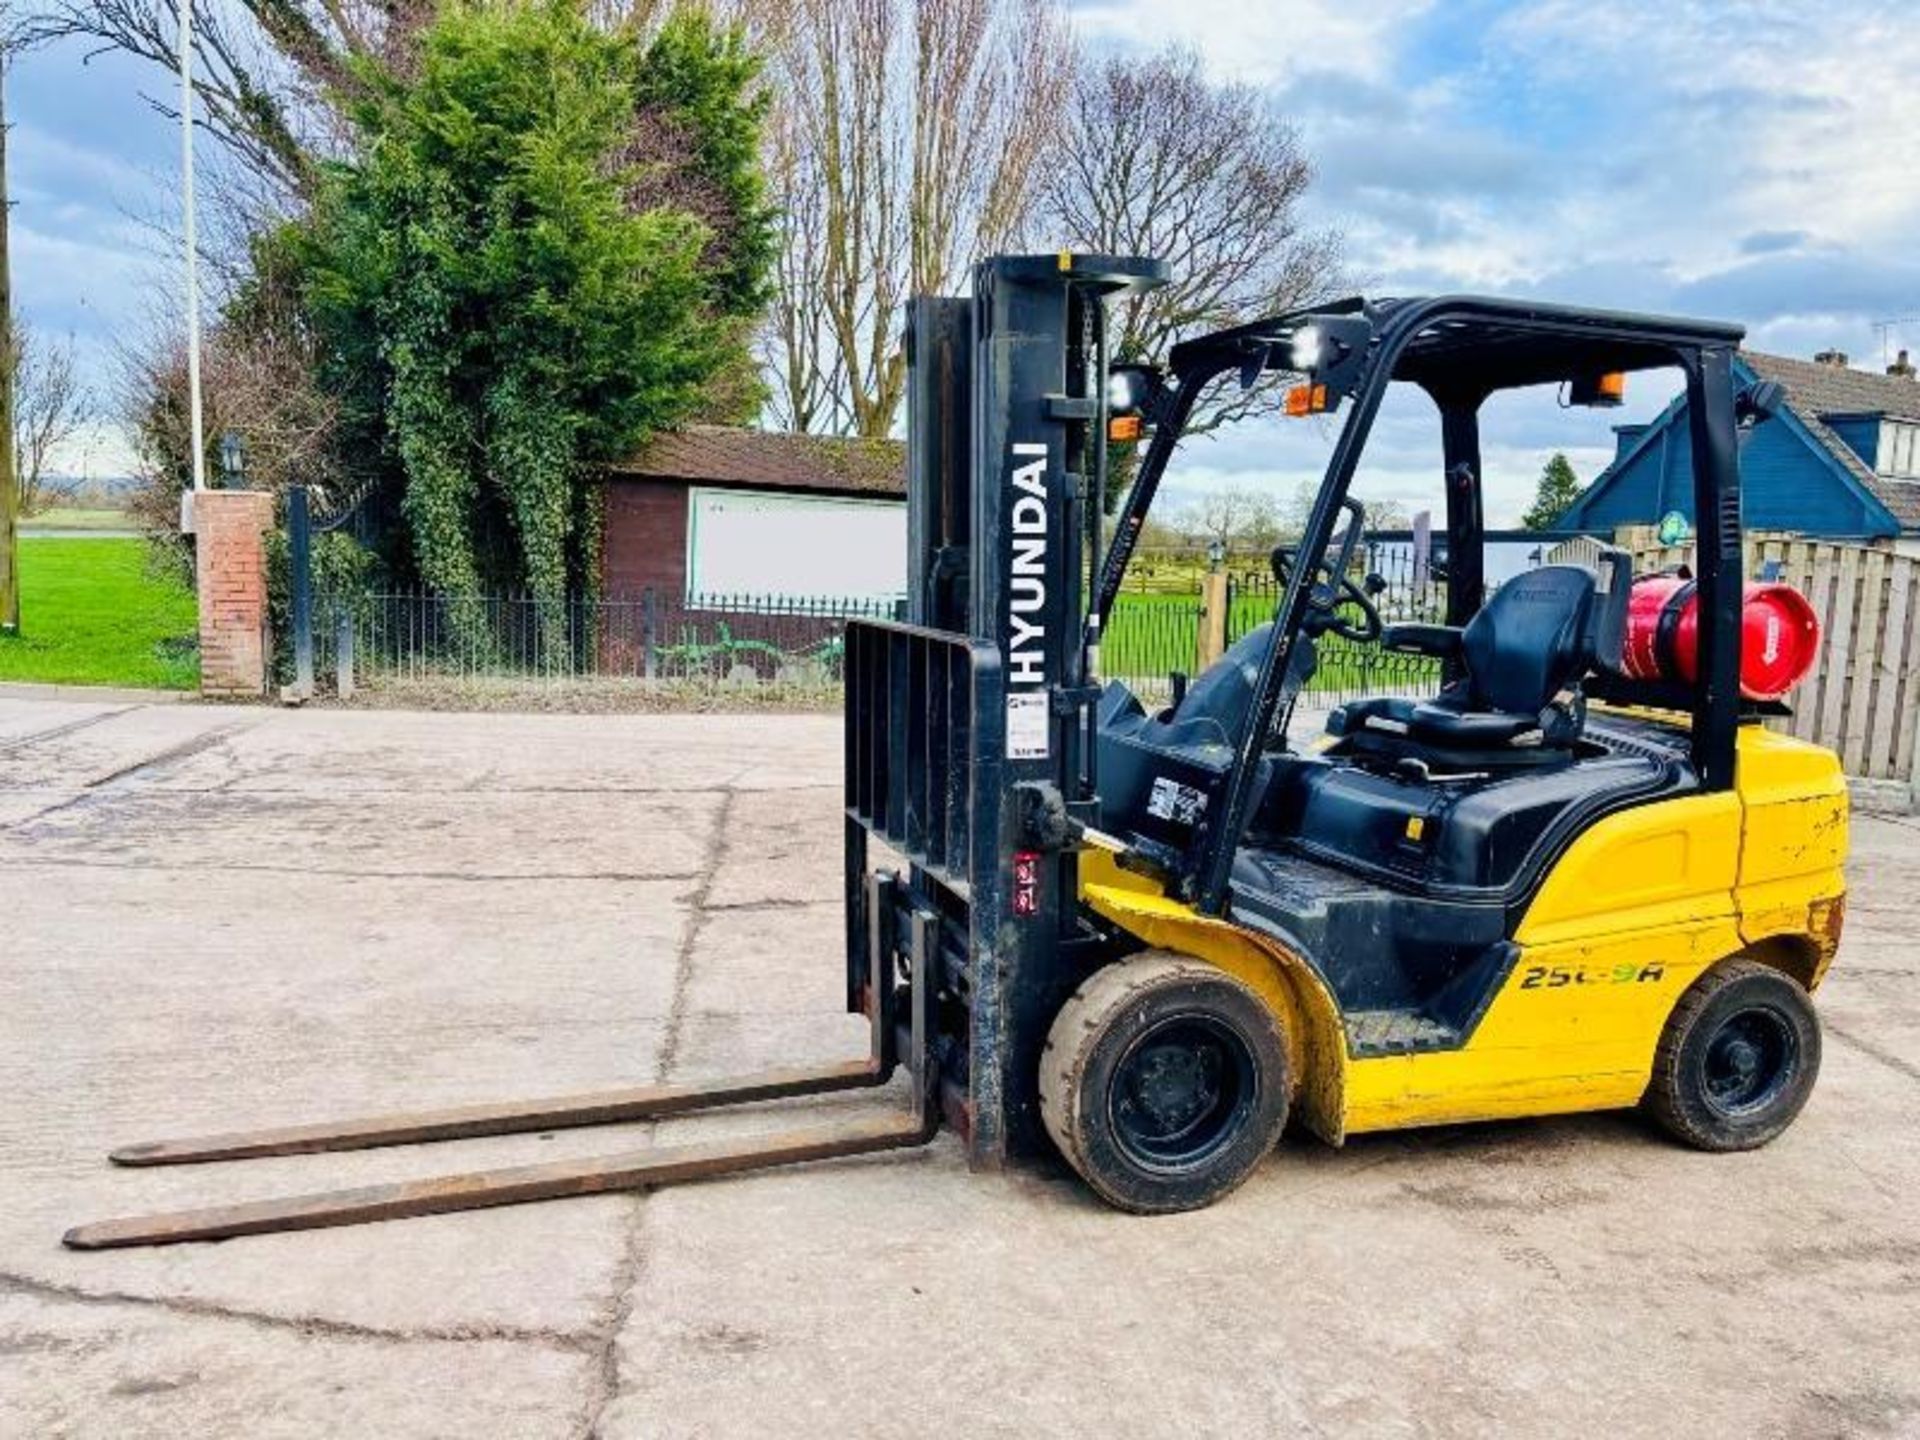 HYUNDAI 25L-9A CONTAINER SPEC FORKLIFT *YEAR 2017, 4463 HOURS* C/W PALLET TINES